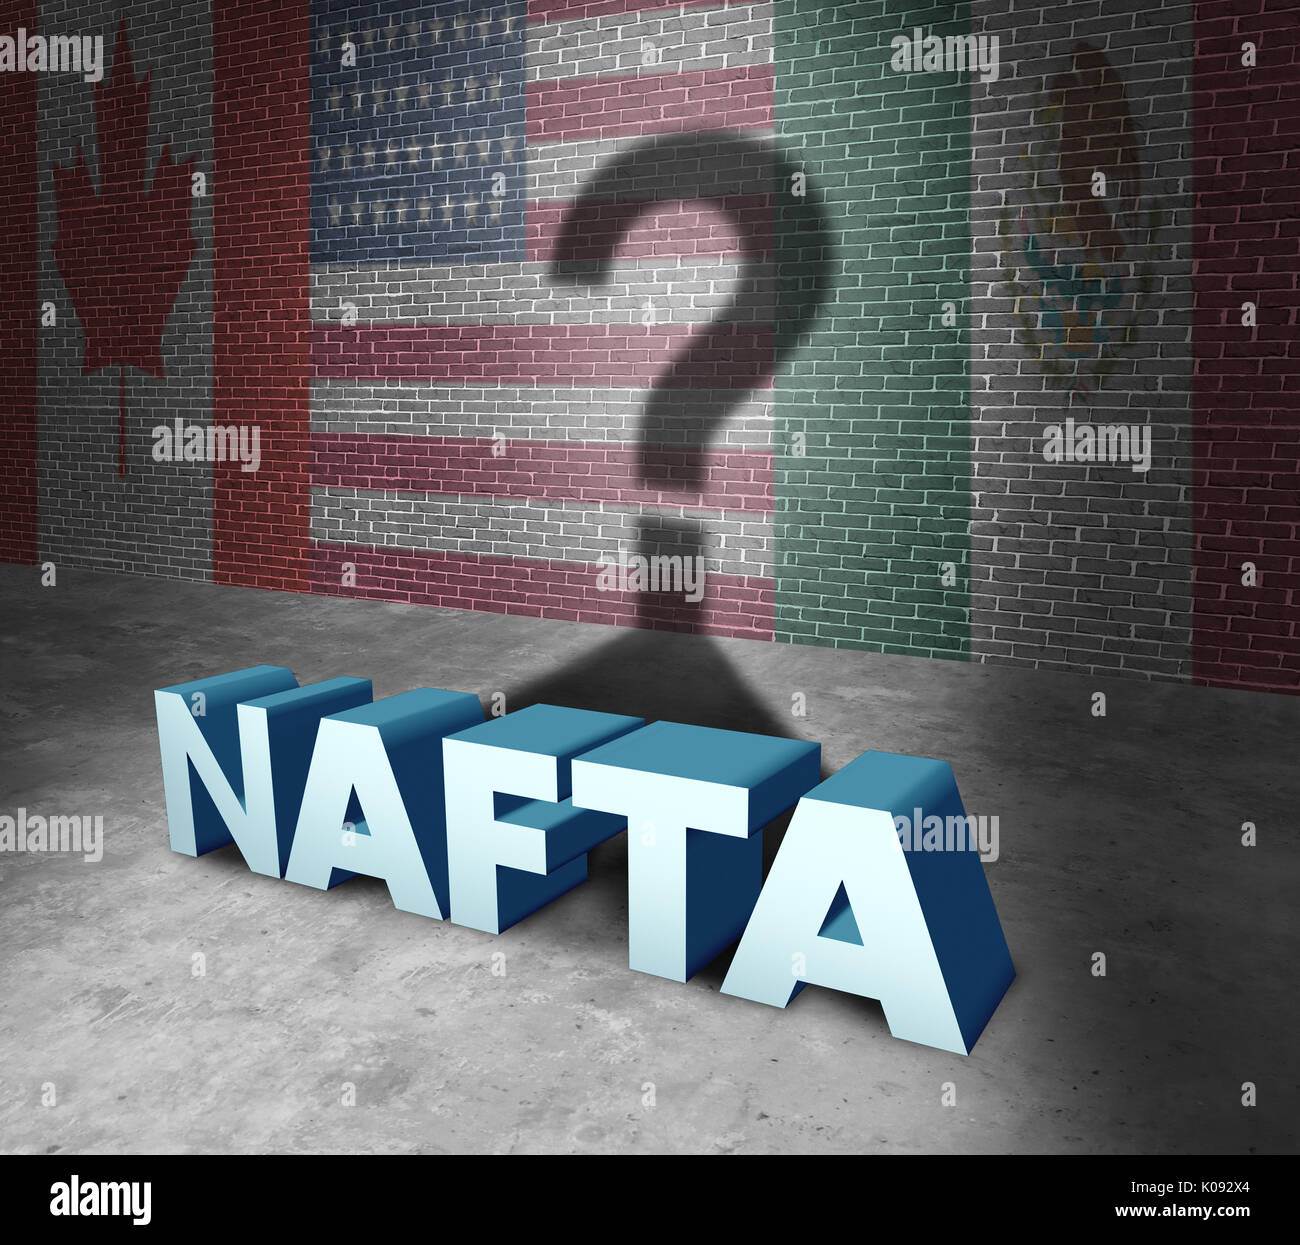 NAFTA or the north american free trade agreement concept as the flags of United States Mexico and Canada as a trade deal negotiation question. Stock Photo